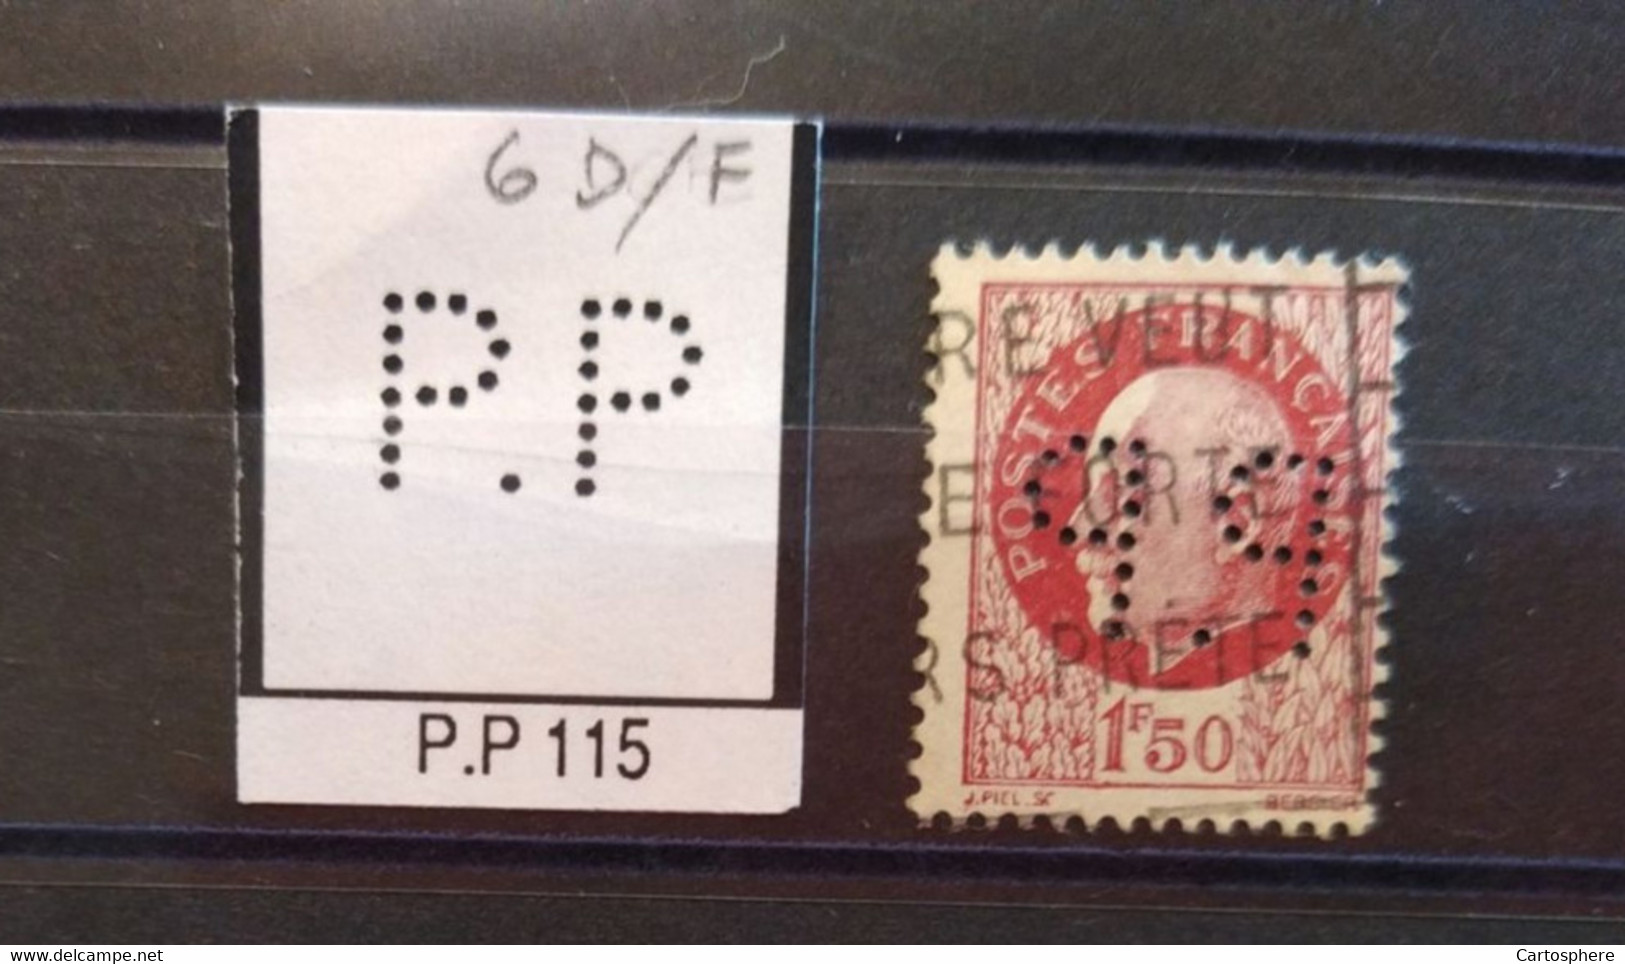 FRANCE  TIMBRE P.P 115  INDICE 6 PP 115 SUR 517 PERFORE PERFORES PERFIN PERFINS PERFO PERFORATION PERFORIERT - Used Stamps